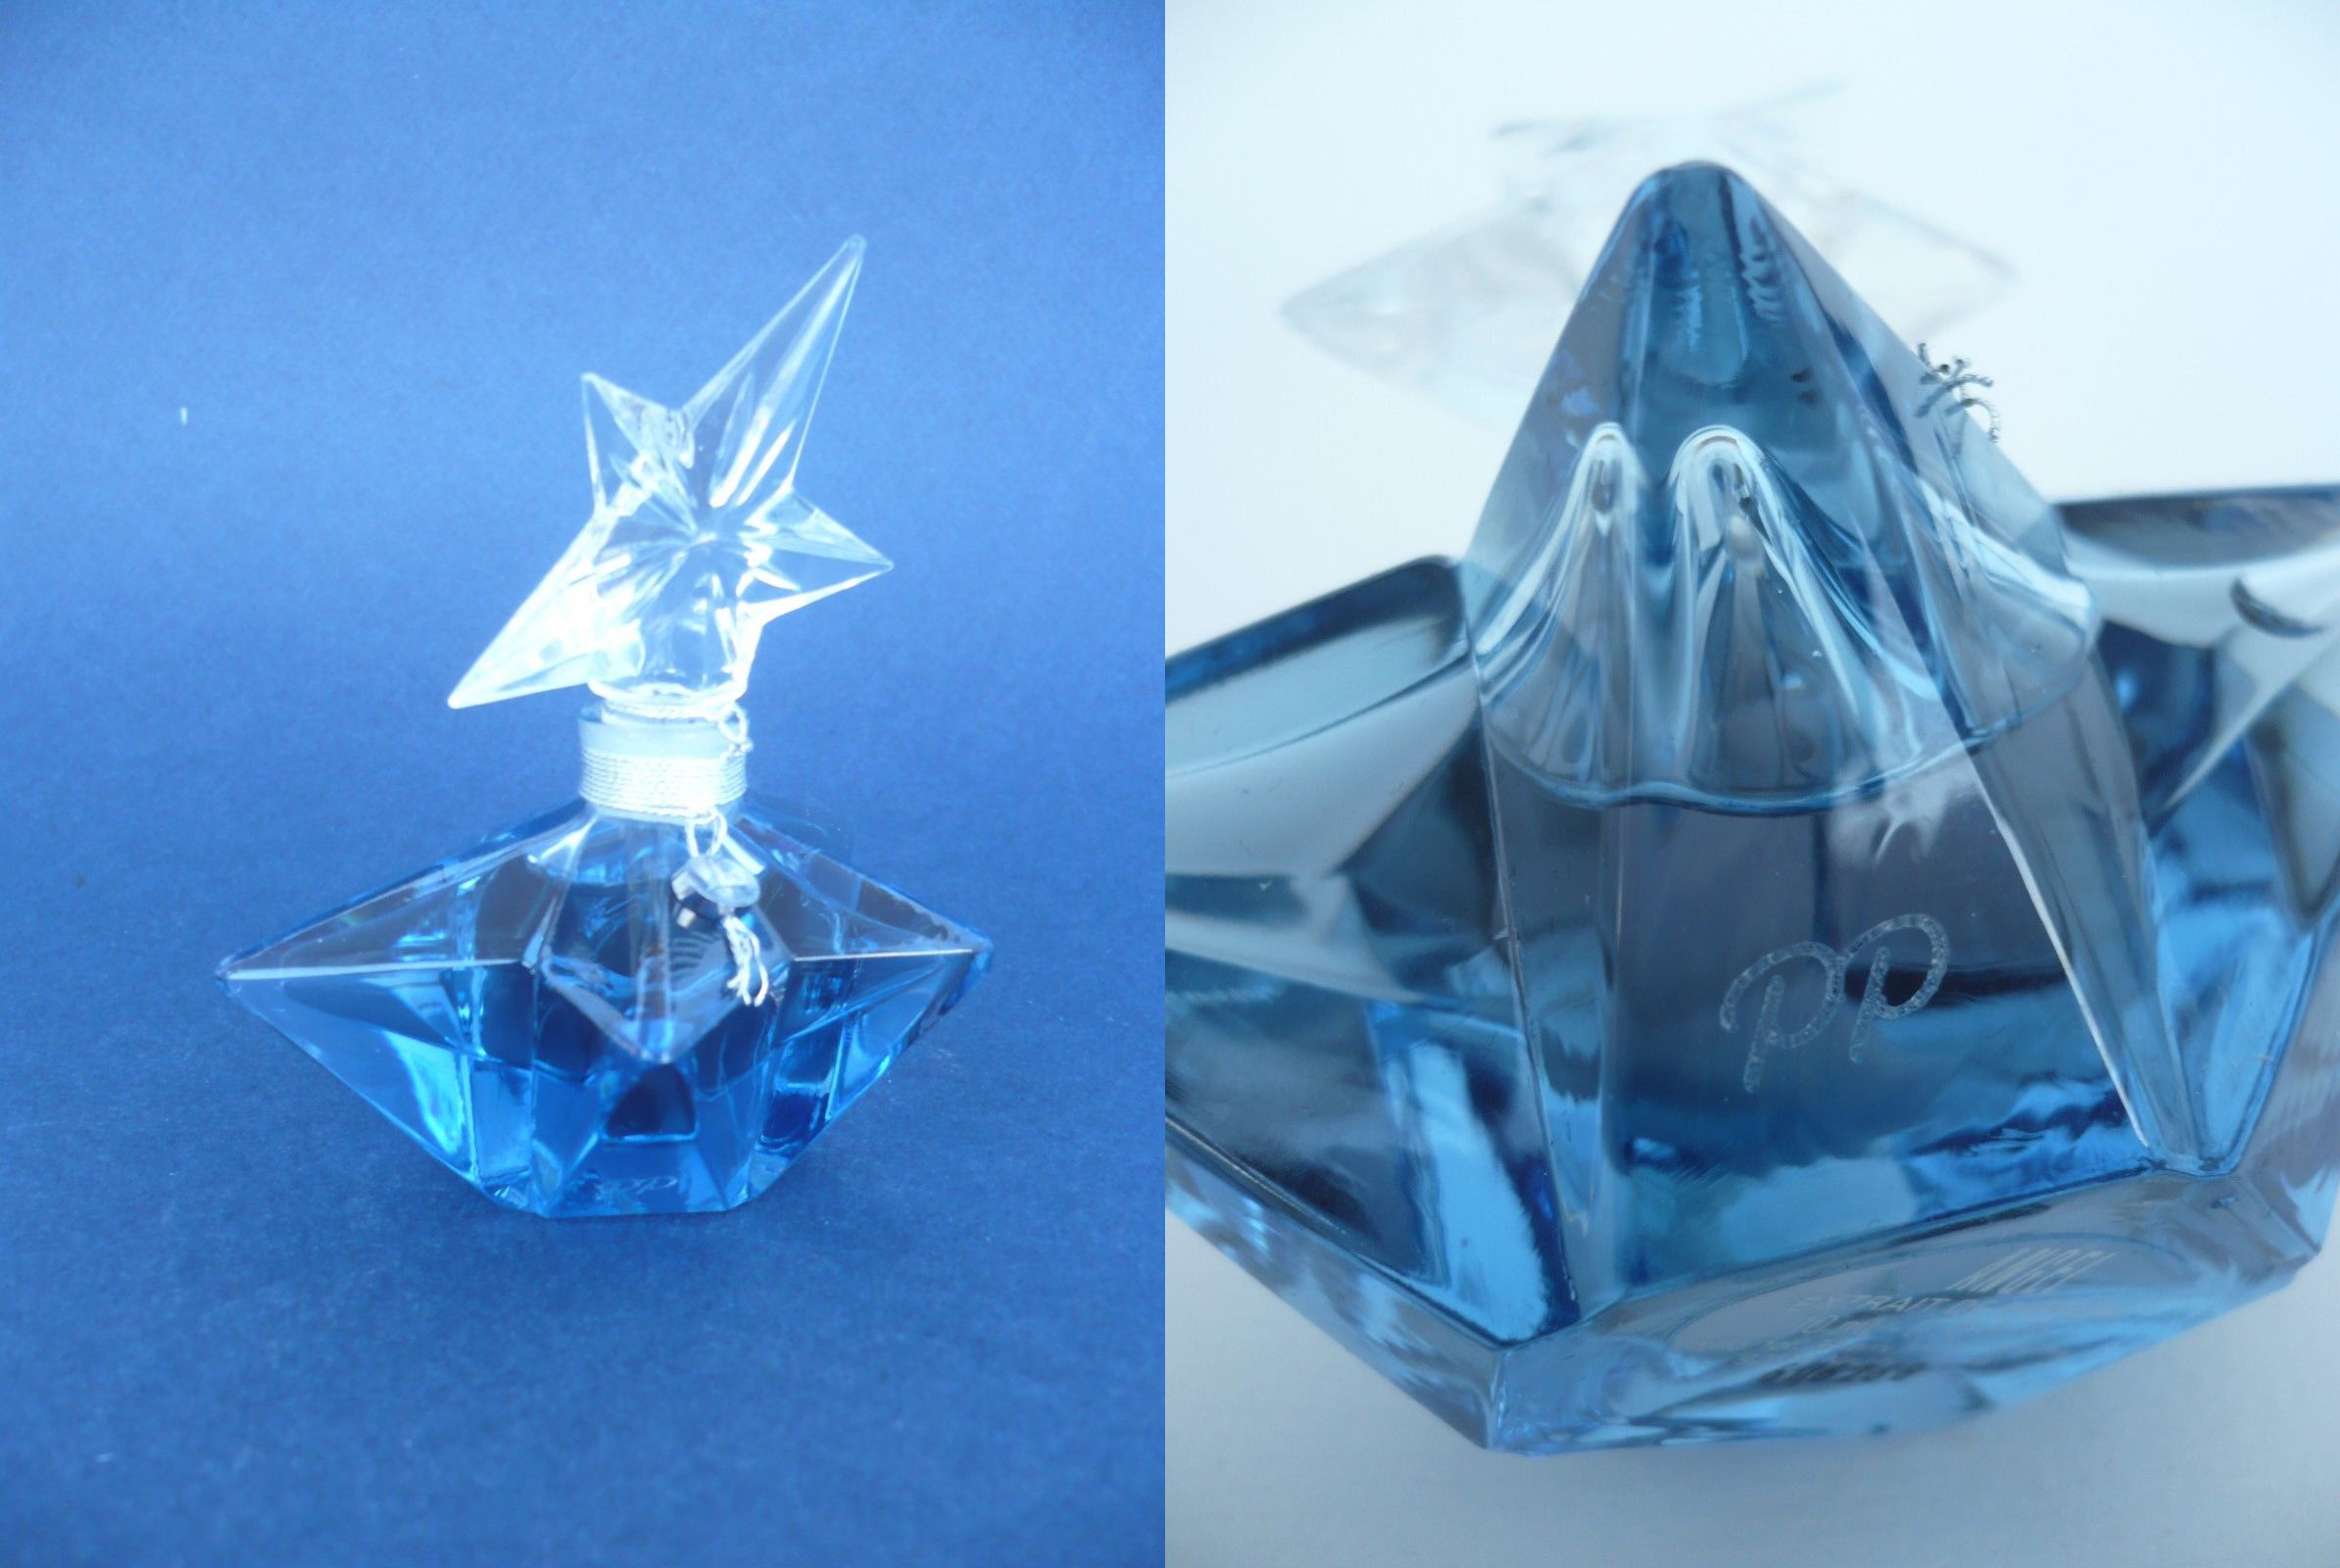 Thierry Mugler Angel Perfume Caprice de Star Ultimate Star (Etoile), 2007. Etched Glass